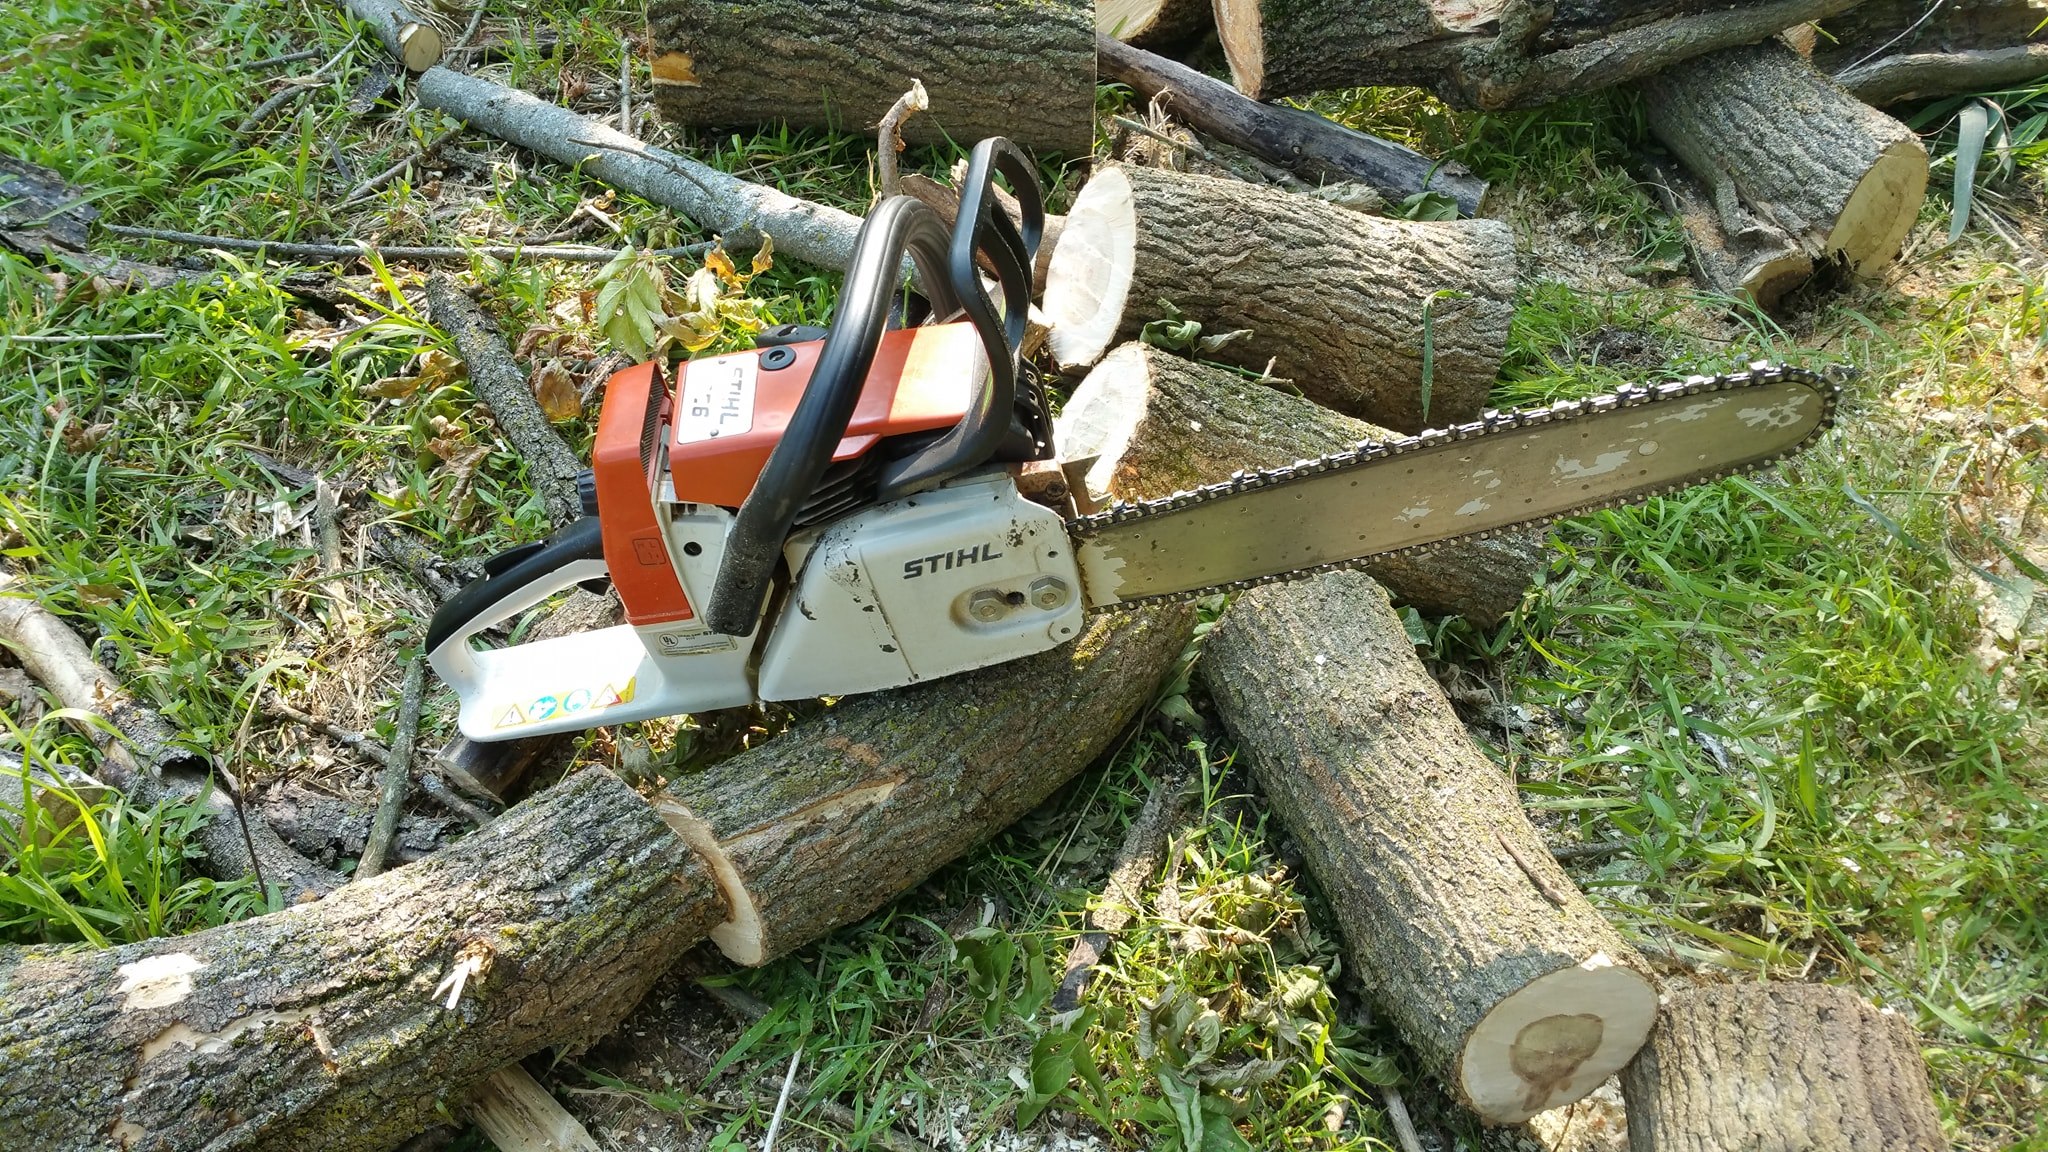 Stihl 026 Review